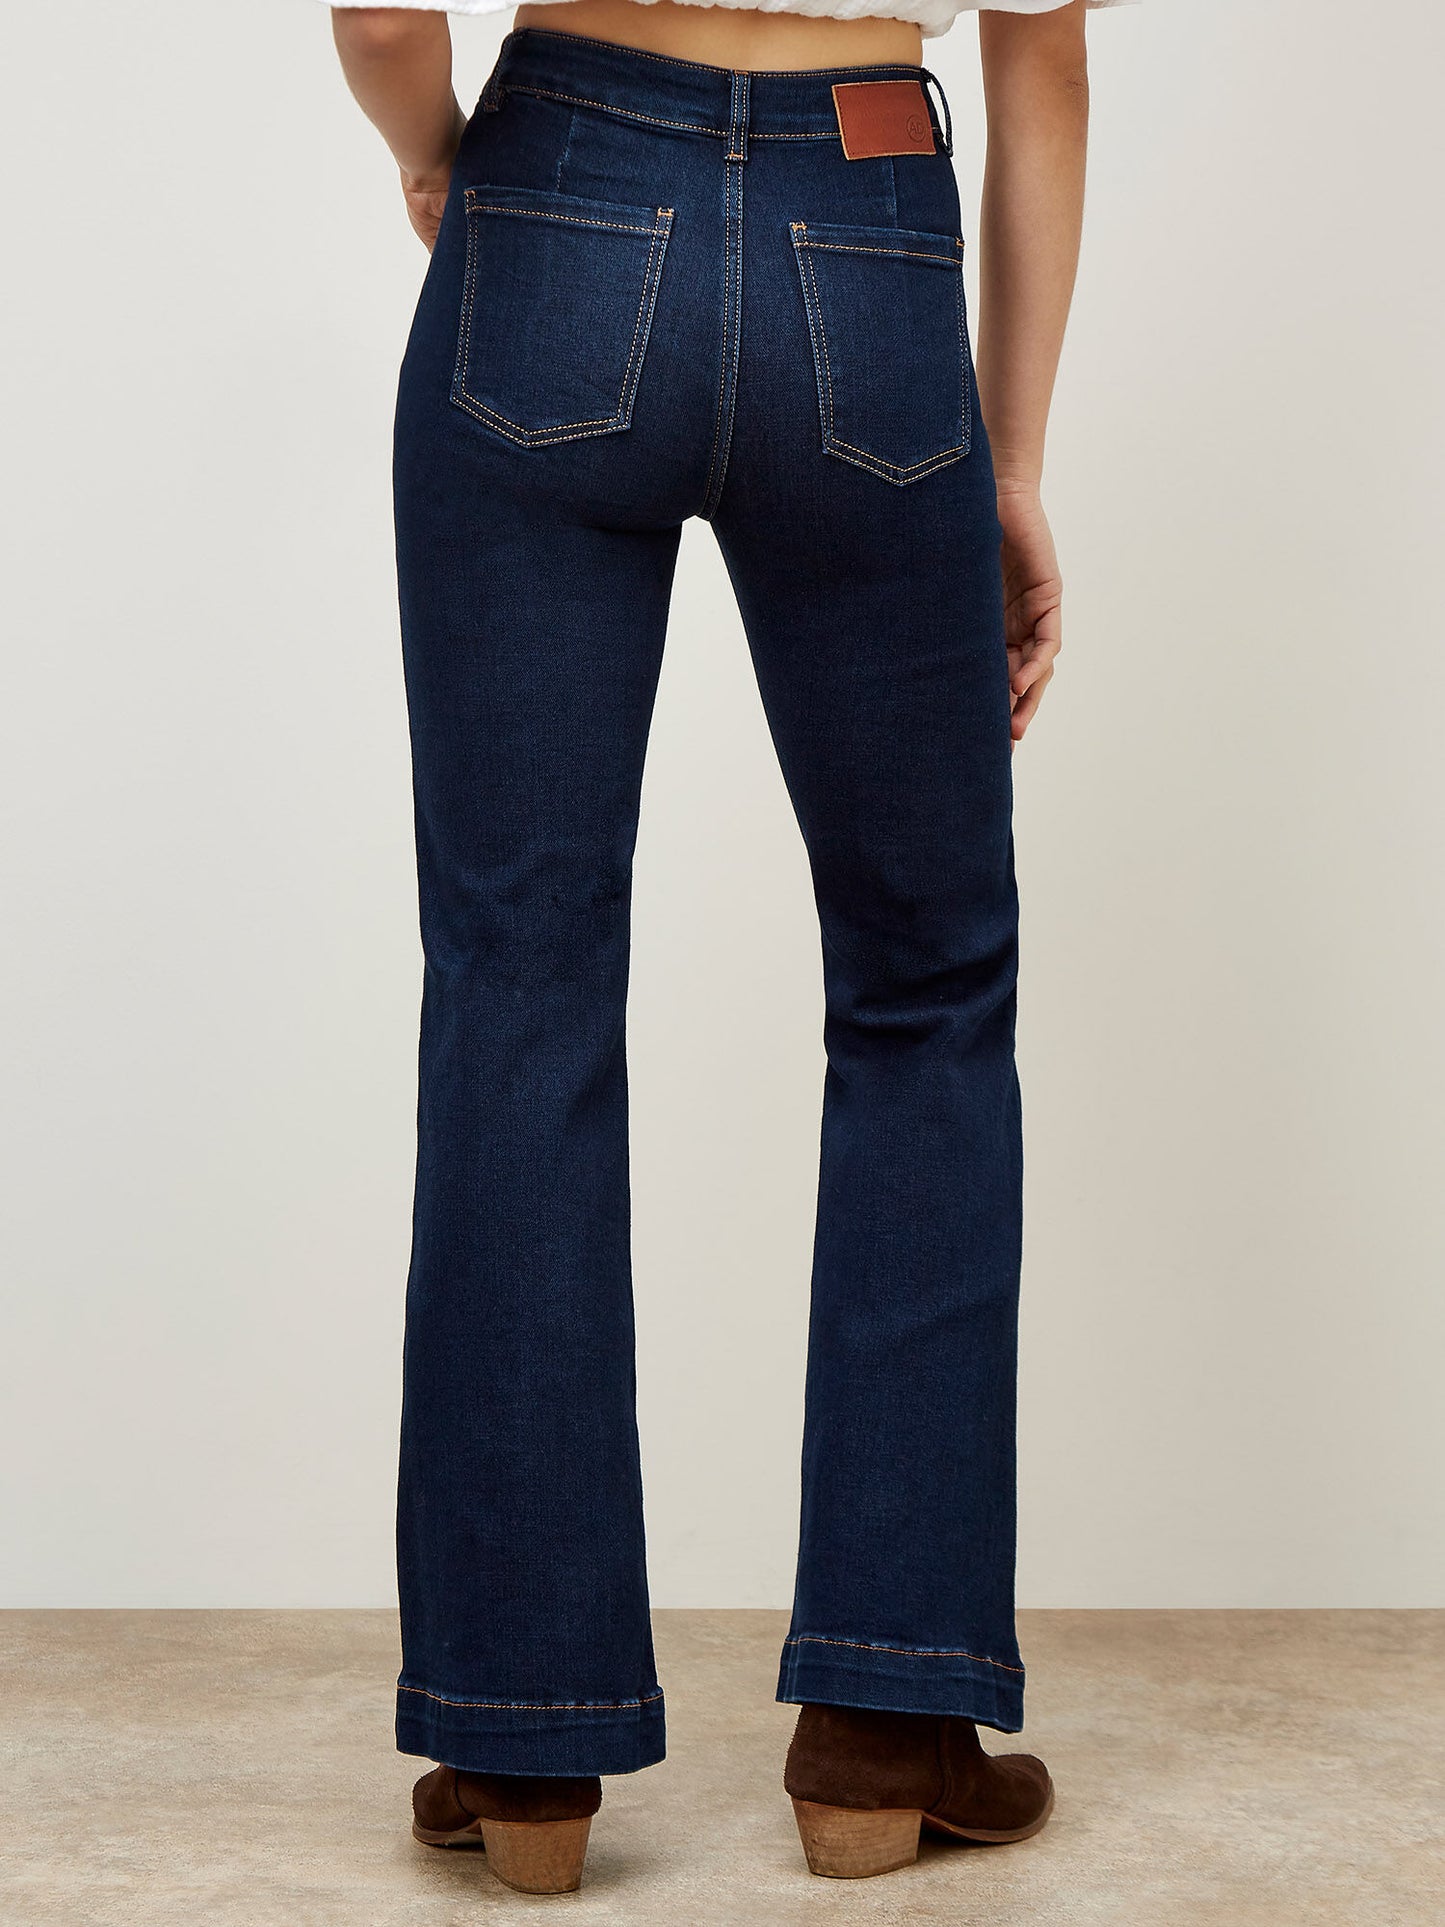 Apricot Luci Flare Dark Wash Jeans Navy